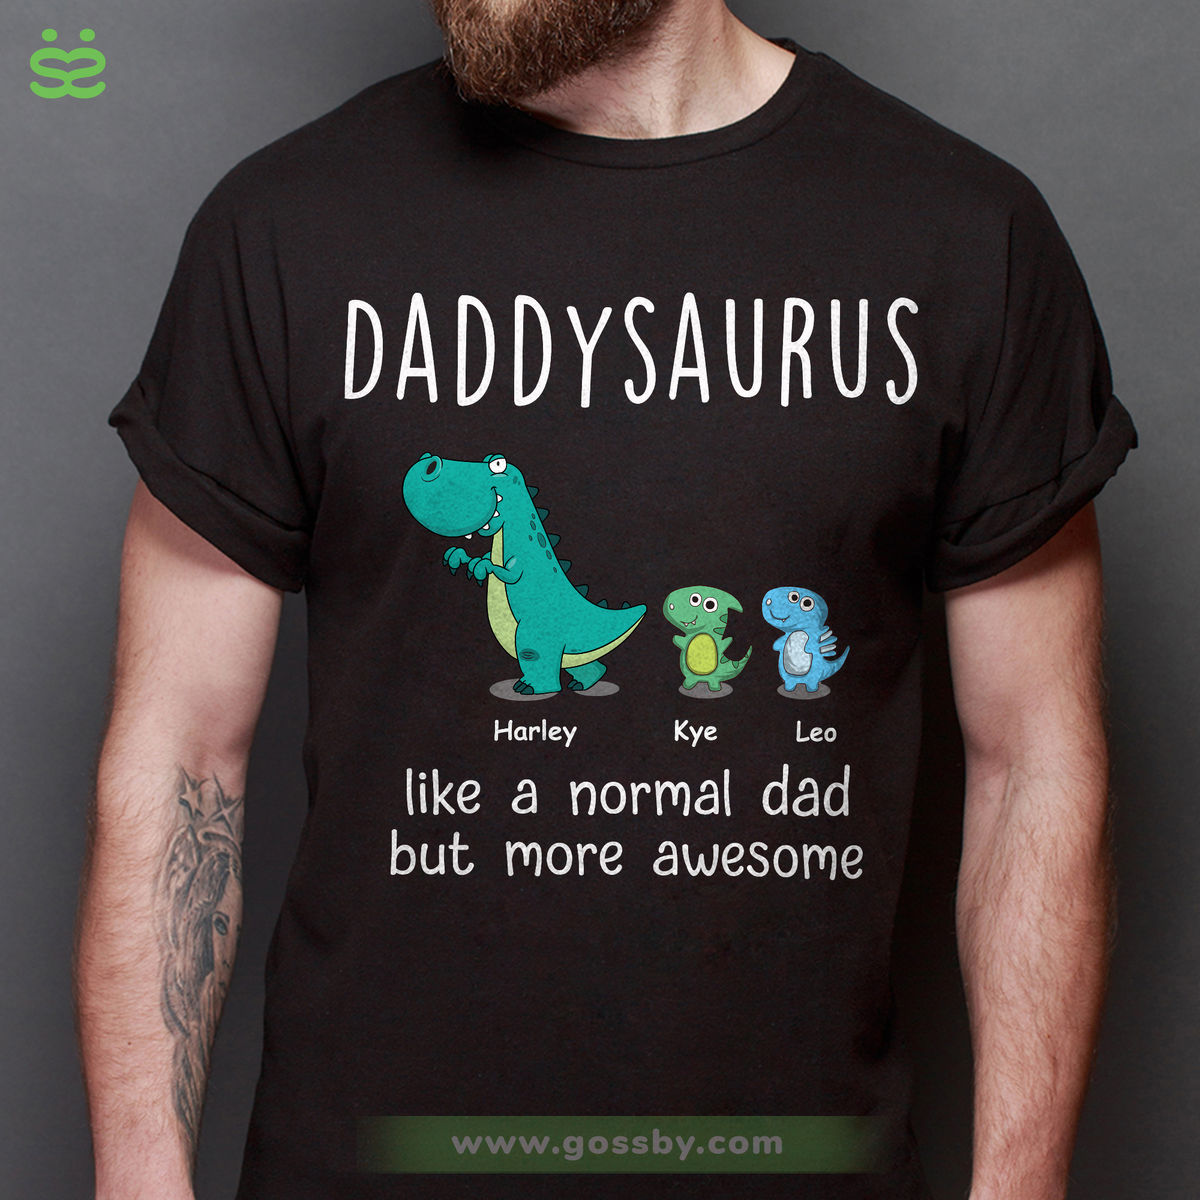 Personalized Shirt - T shirt Daddysaurus - Like a Normal Dad but more awesome (B)